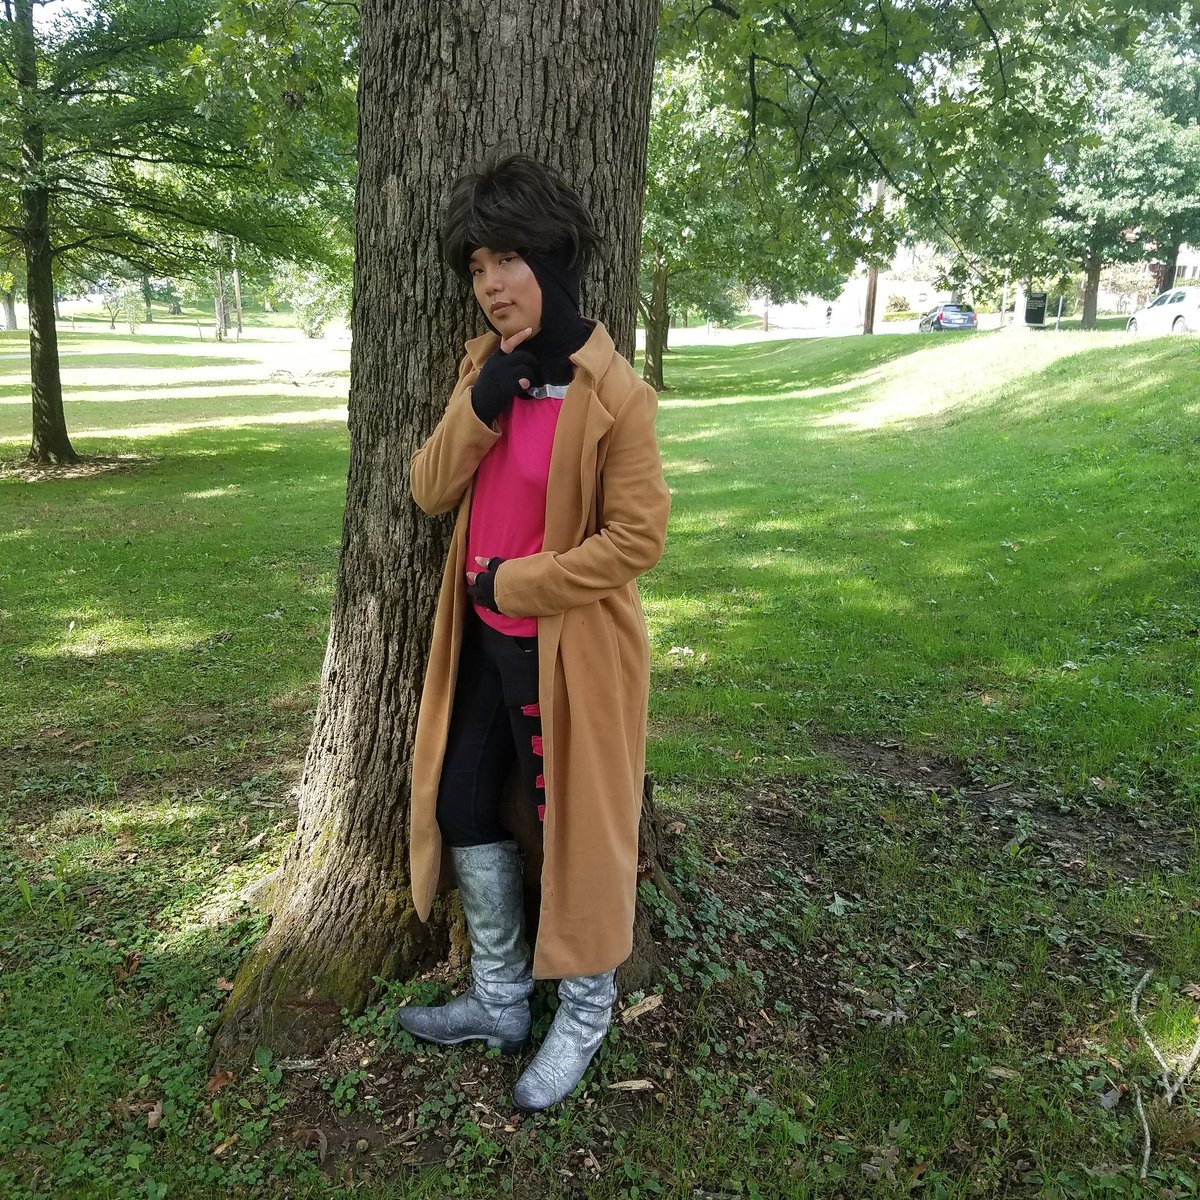 I love my Gambit cosplay so much
#gambit #gambitcosplay #marvel #marvelcosplay #marvelcomics #xmen #xfactor #poccosplay #cosplay